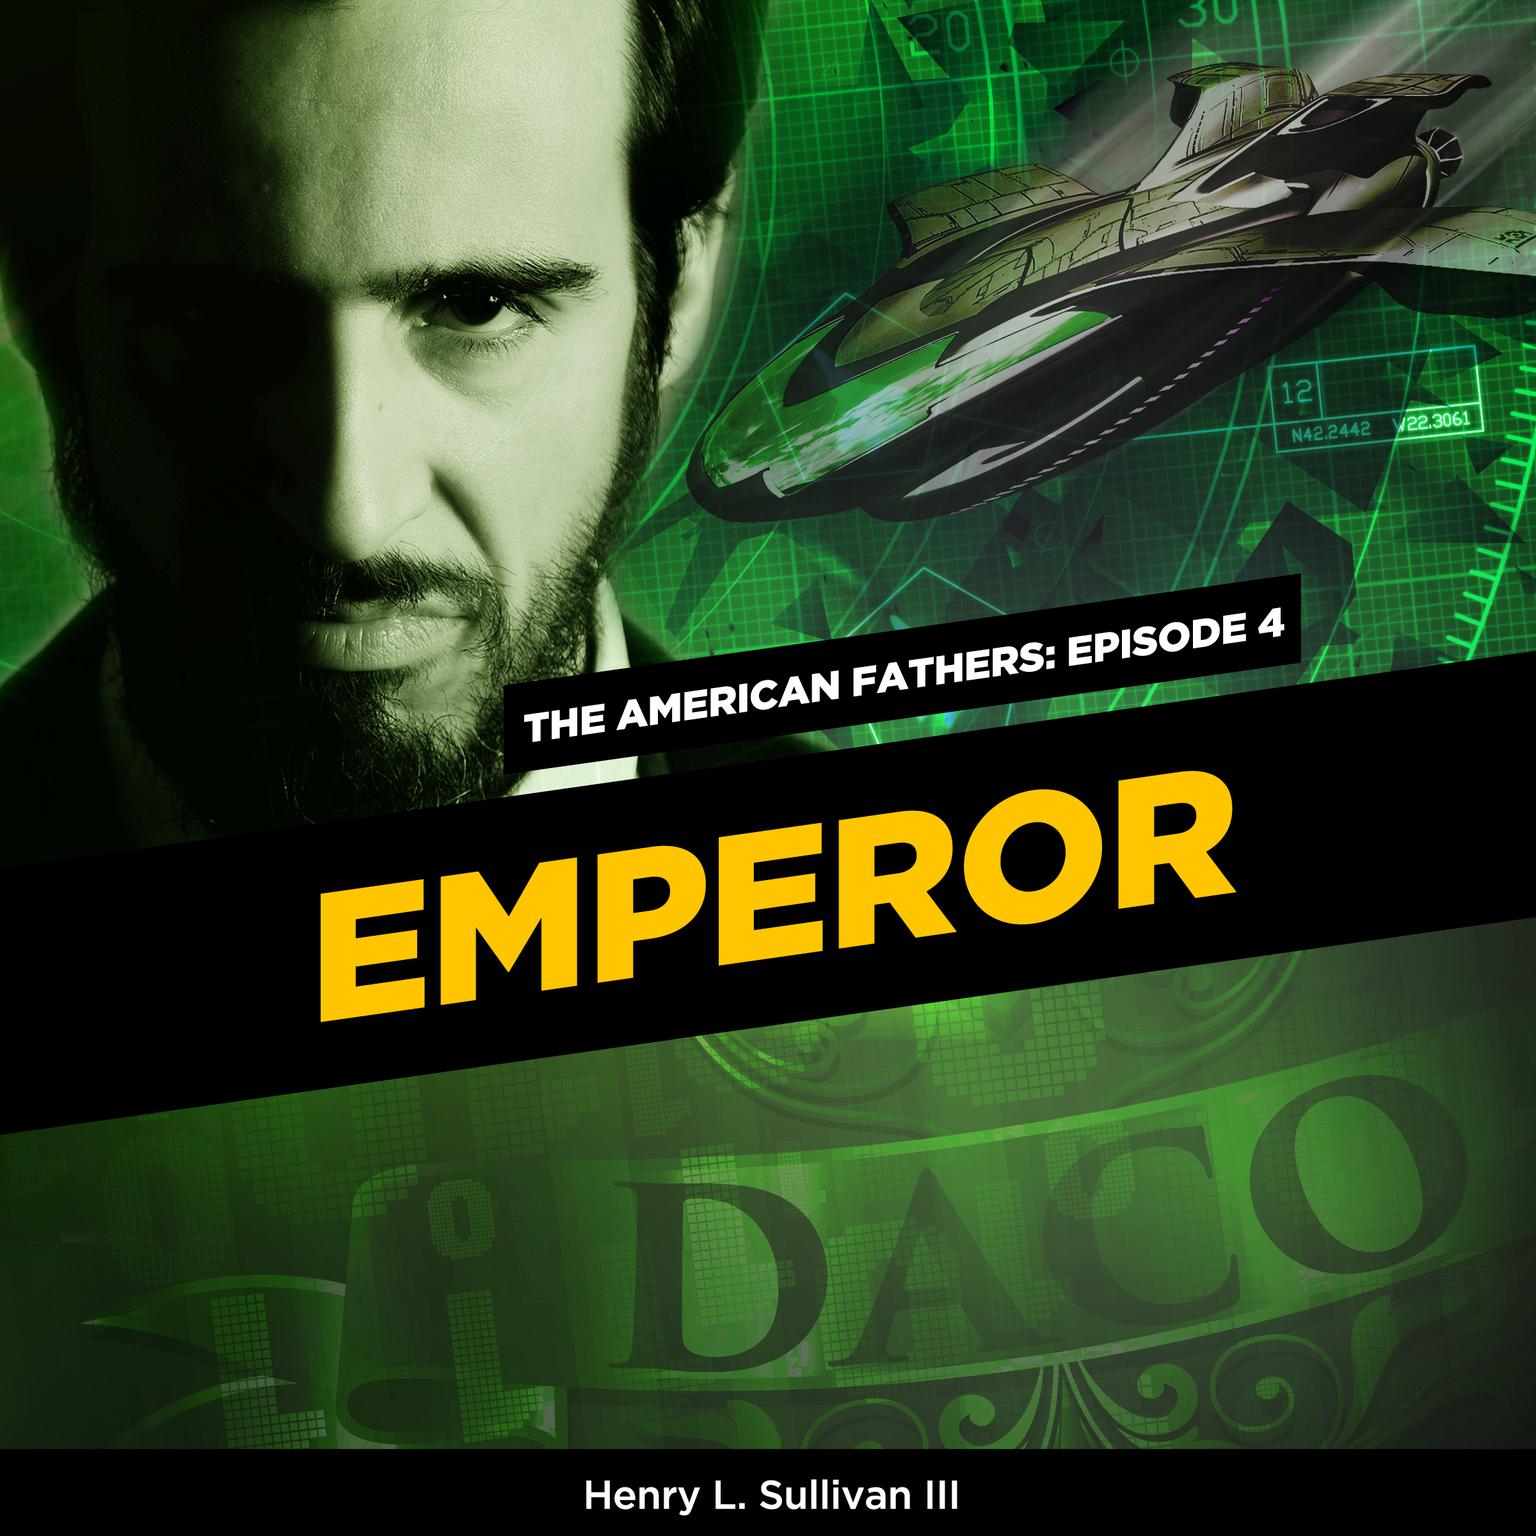 THE AMERICAN FATHERS EPISODE 4: EMPEROR Audiobook, by Henry L. Sullivan